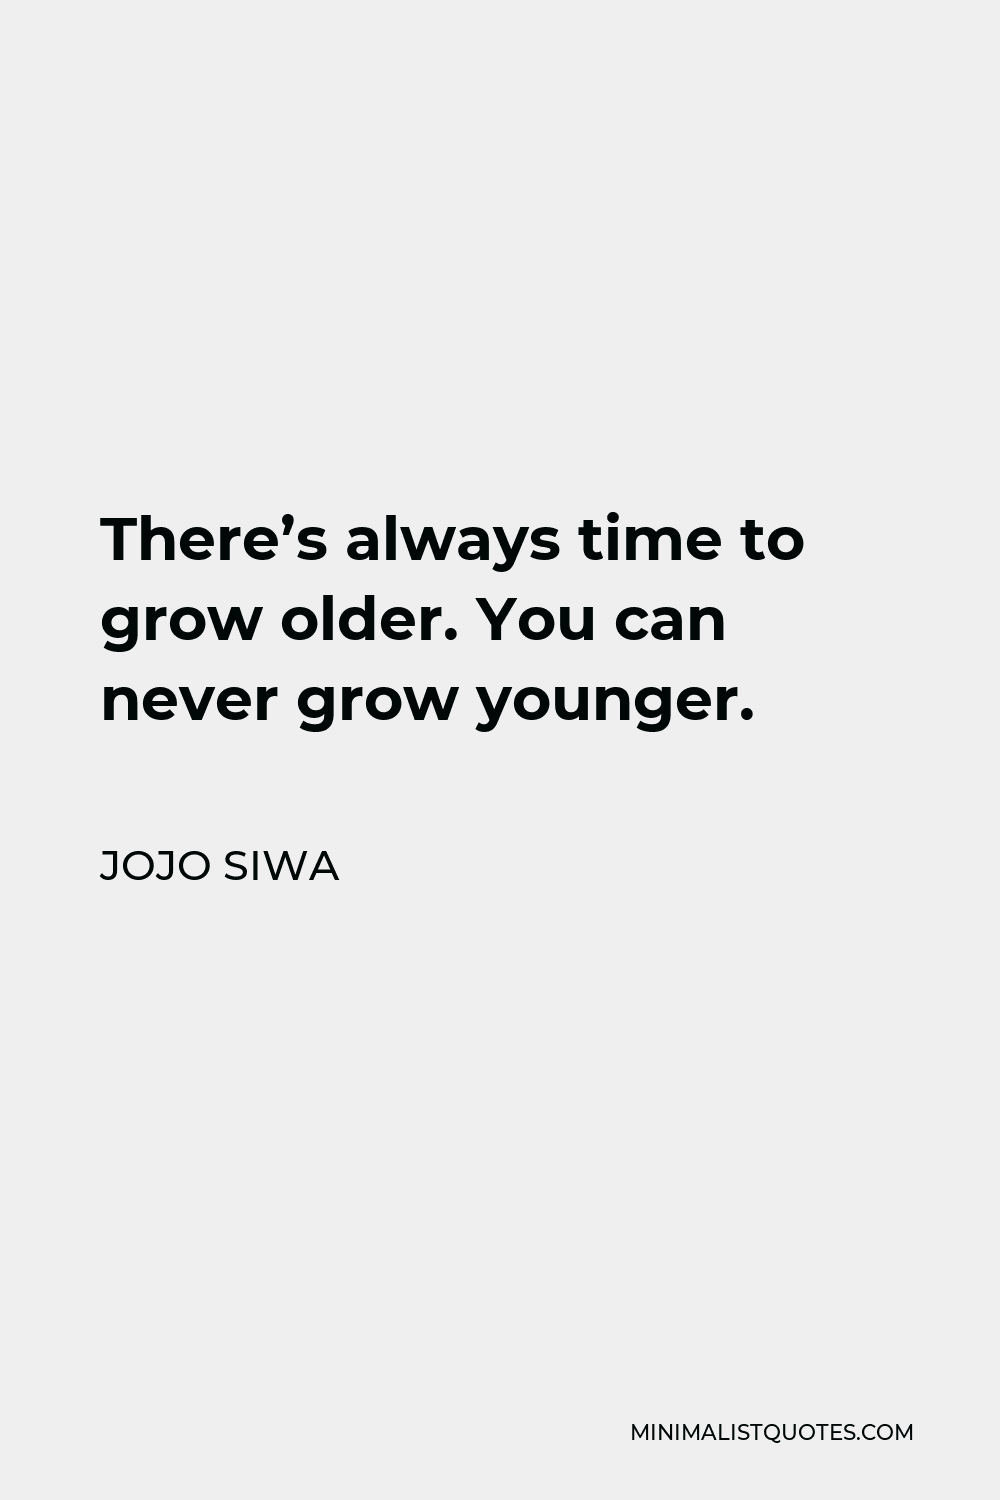 JoJo Siwa Quote - There’s always time to grow older. You can never grow younger.